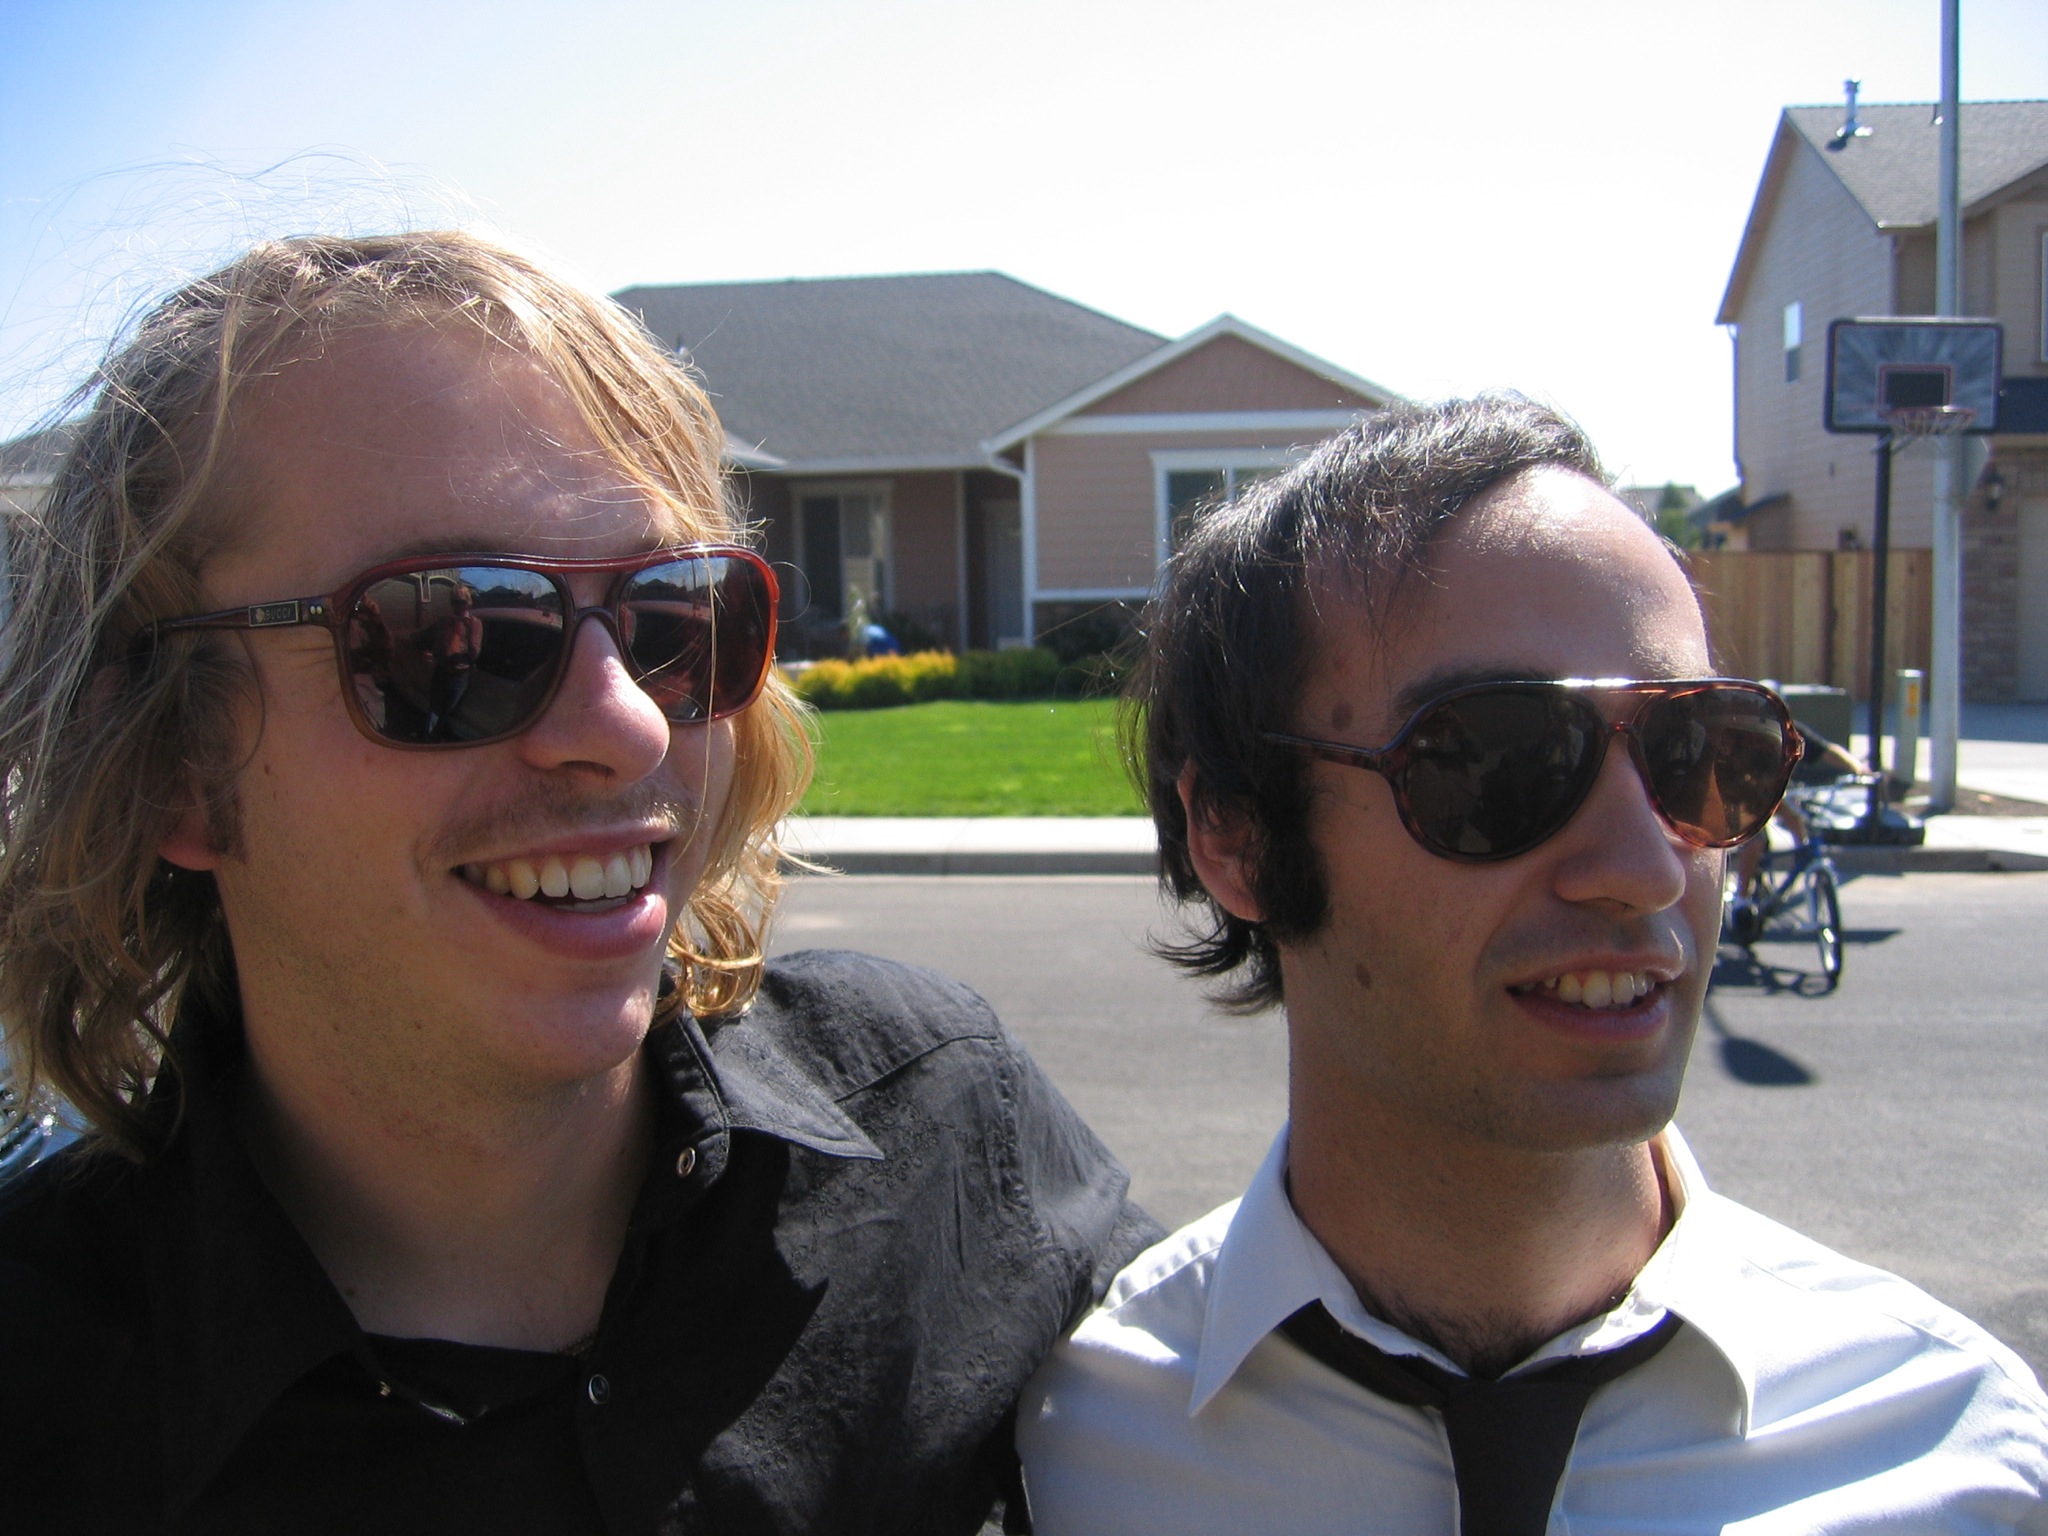 a man with long hair and sunglasses standing next to another man